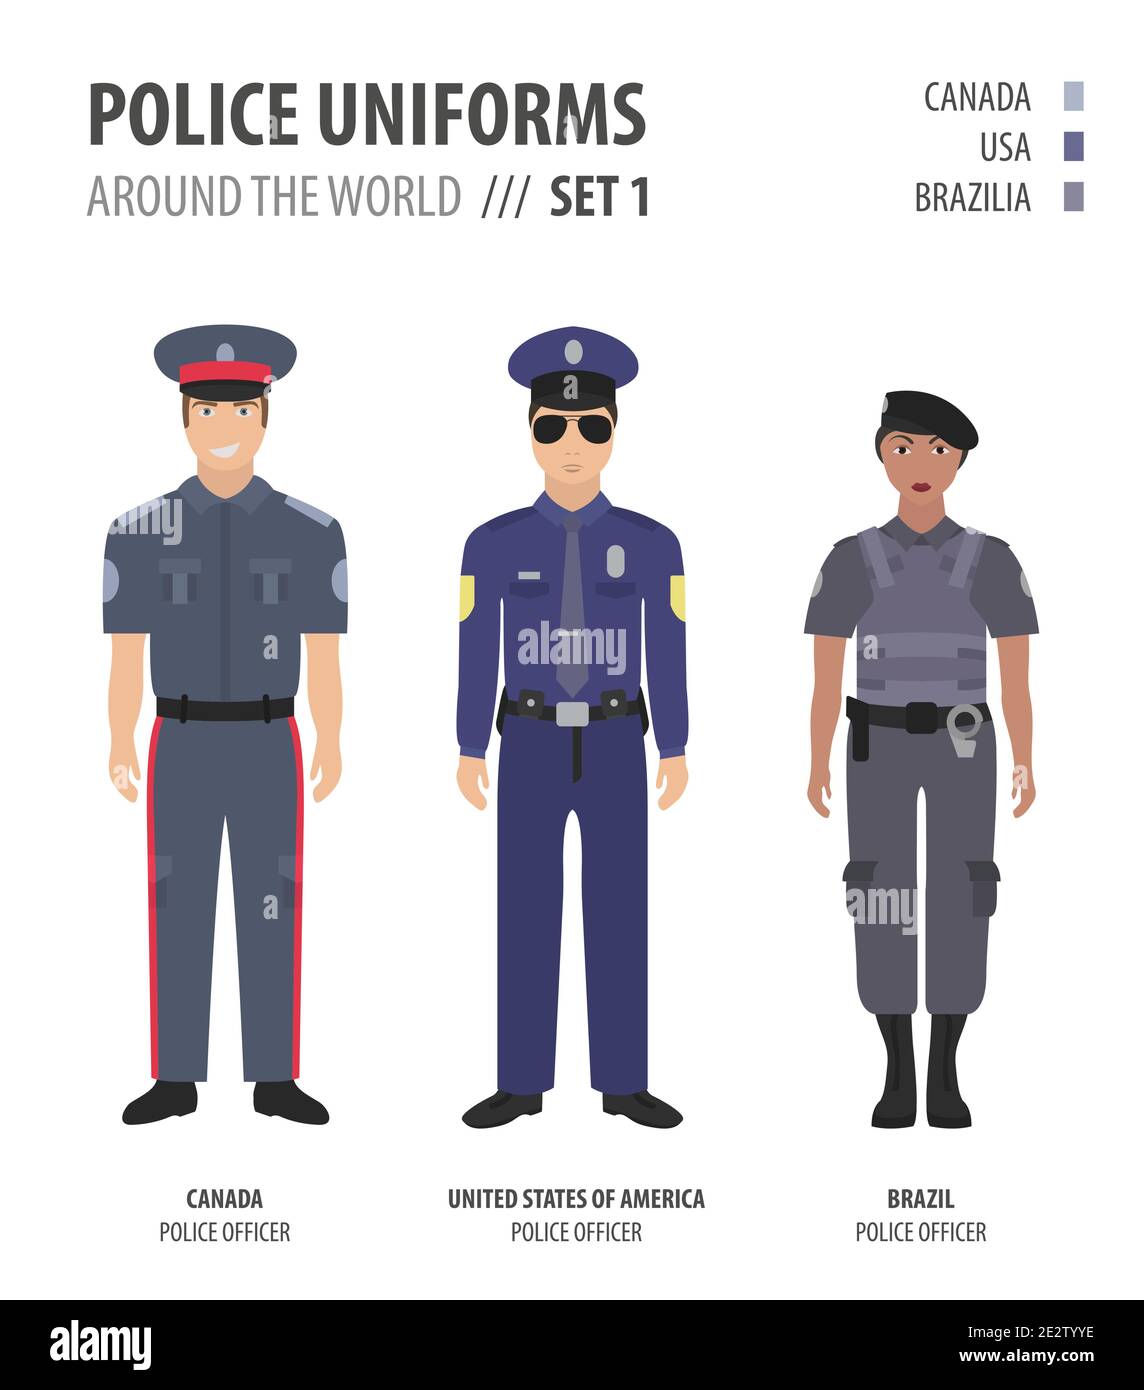 Police uniforms around the world. Suit, clothing of american police ...